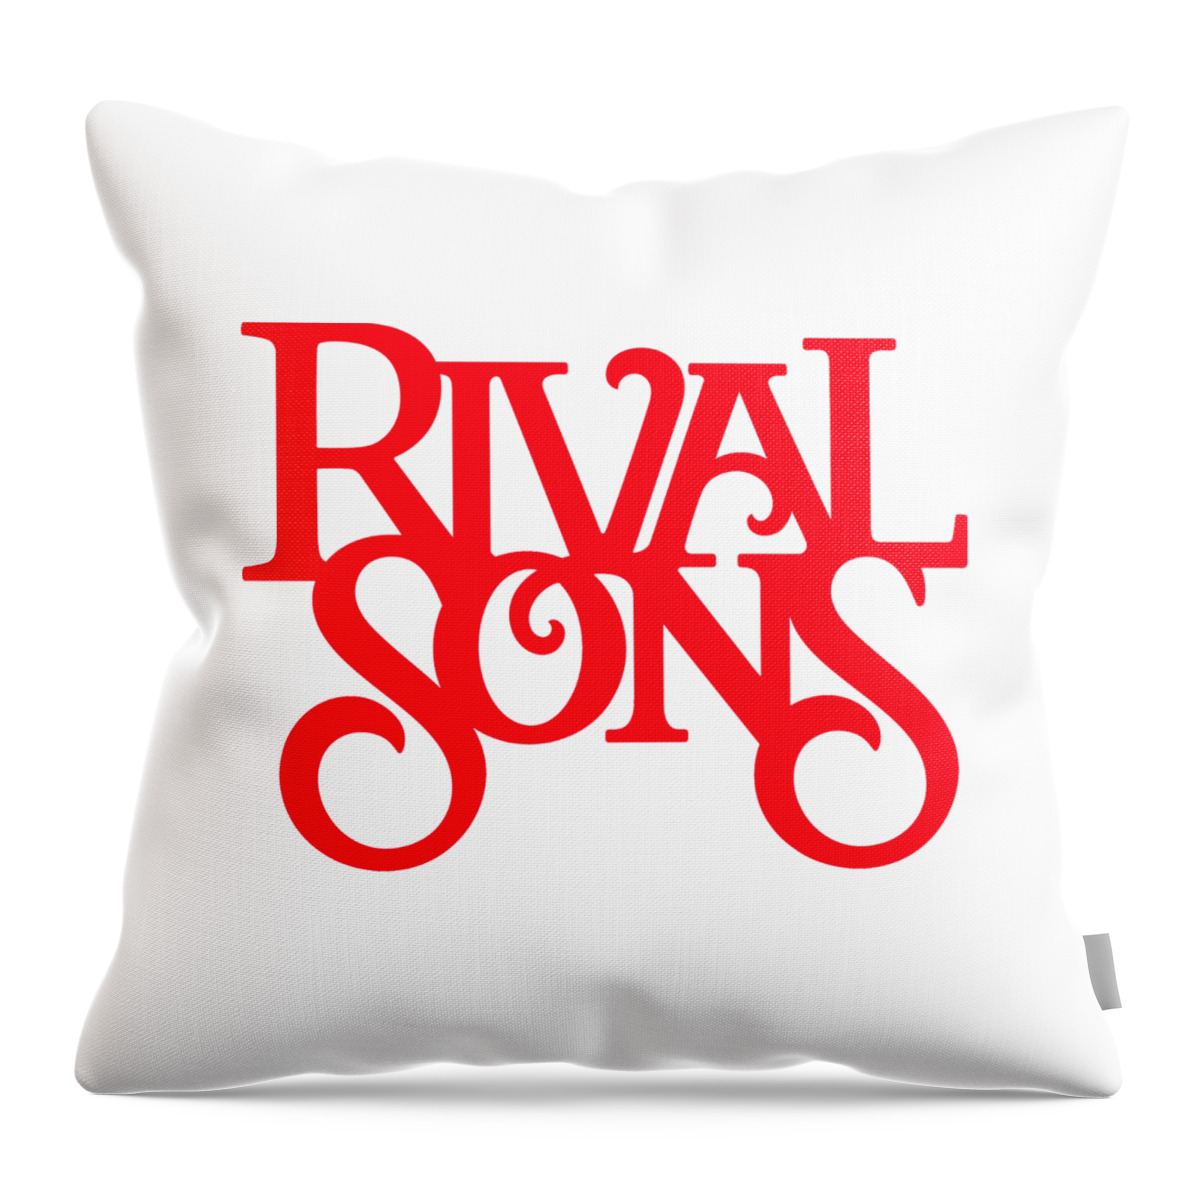 Rival Sons Throw Pillow featuring the digital art Rival Sons #1 by Namururira Abc